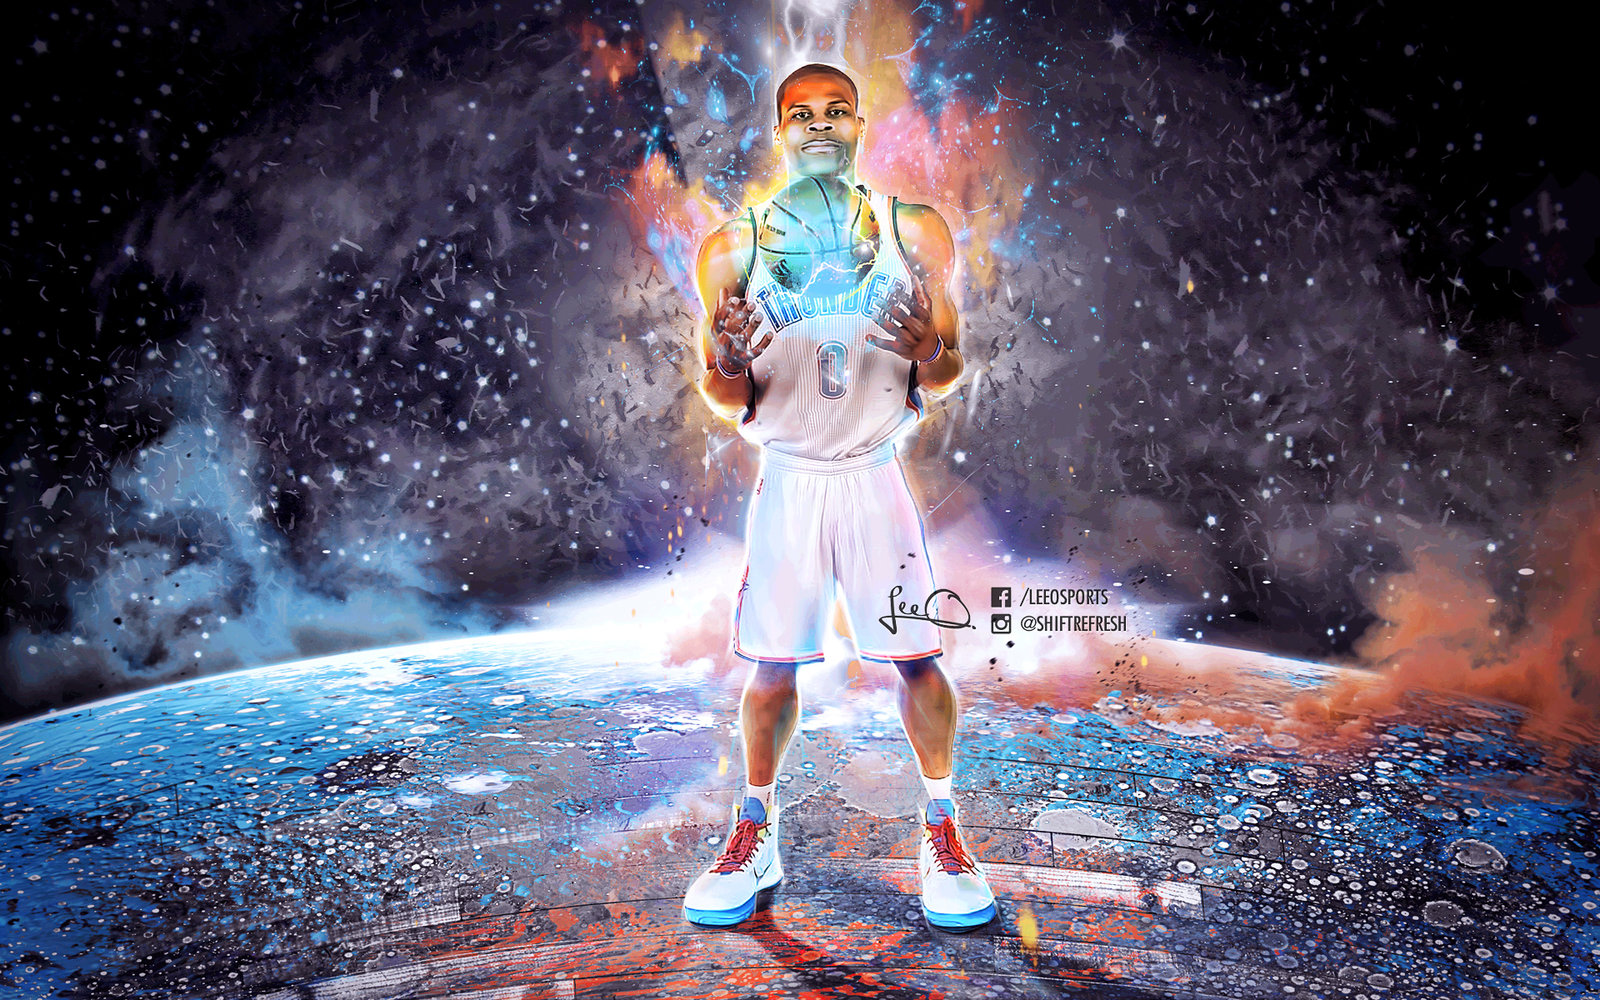 russell westbrook wallpaper,sky,atmosphere,space,basketball player,universe